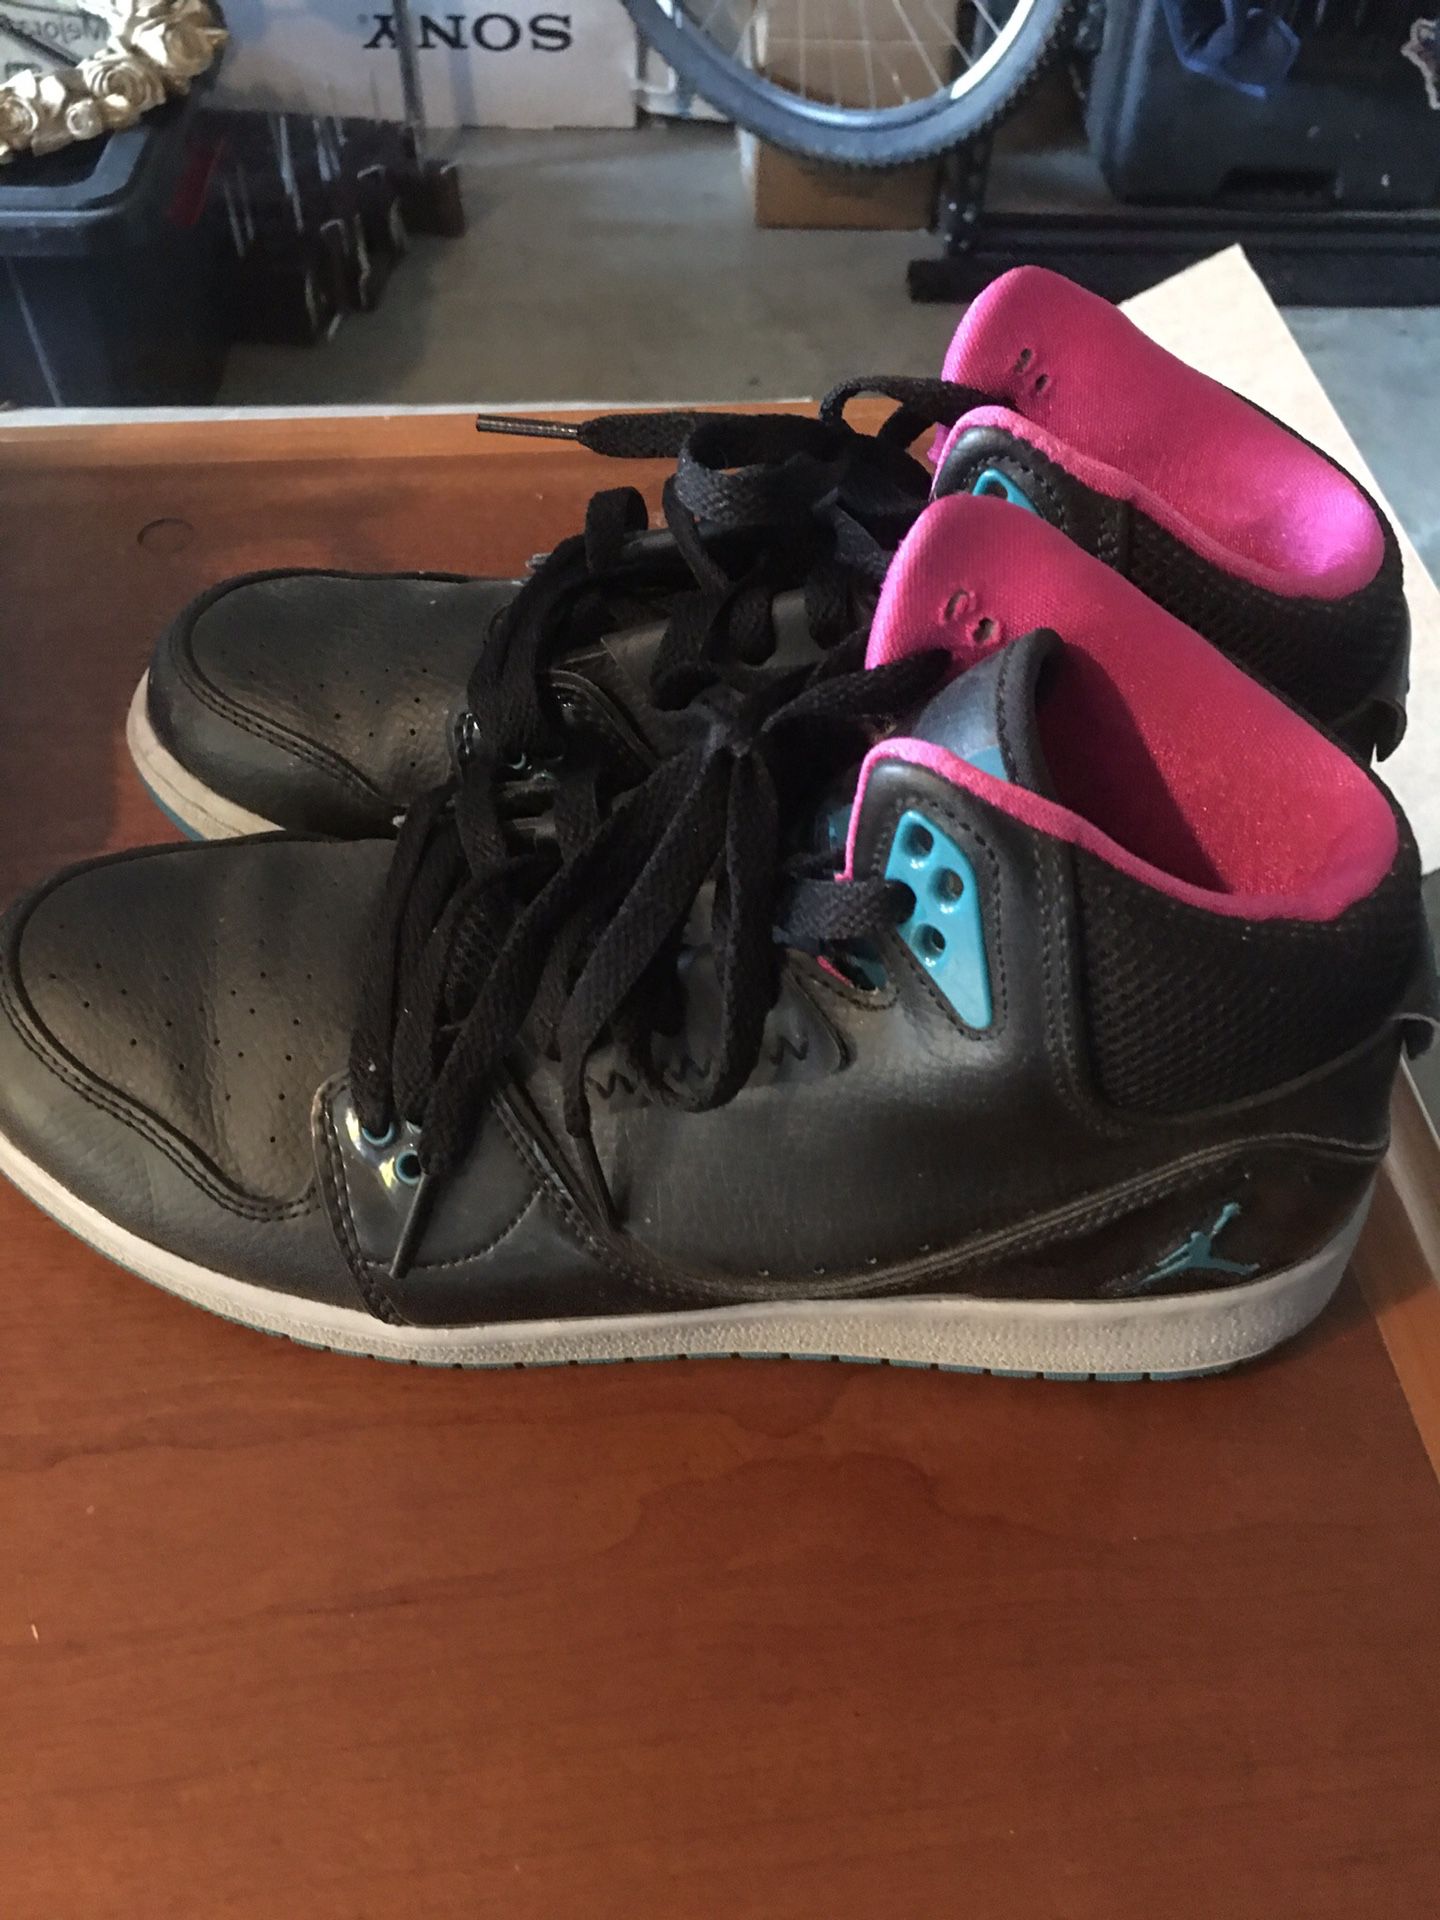 Nike Air Jordan shoes throw back leather black with pink and teal accents like new size 7Y rare collectors itemk